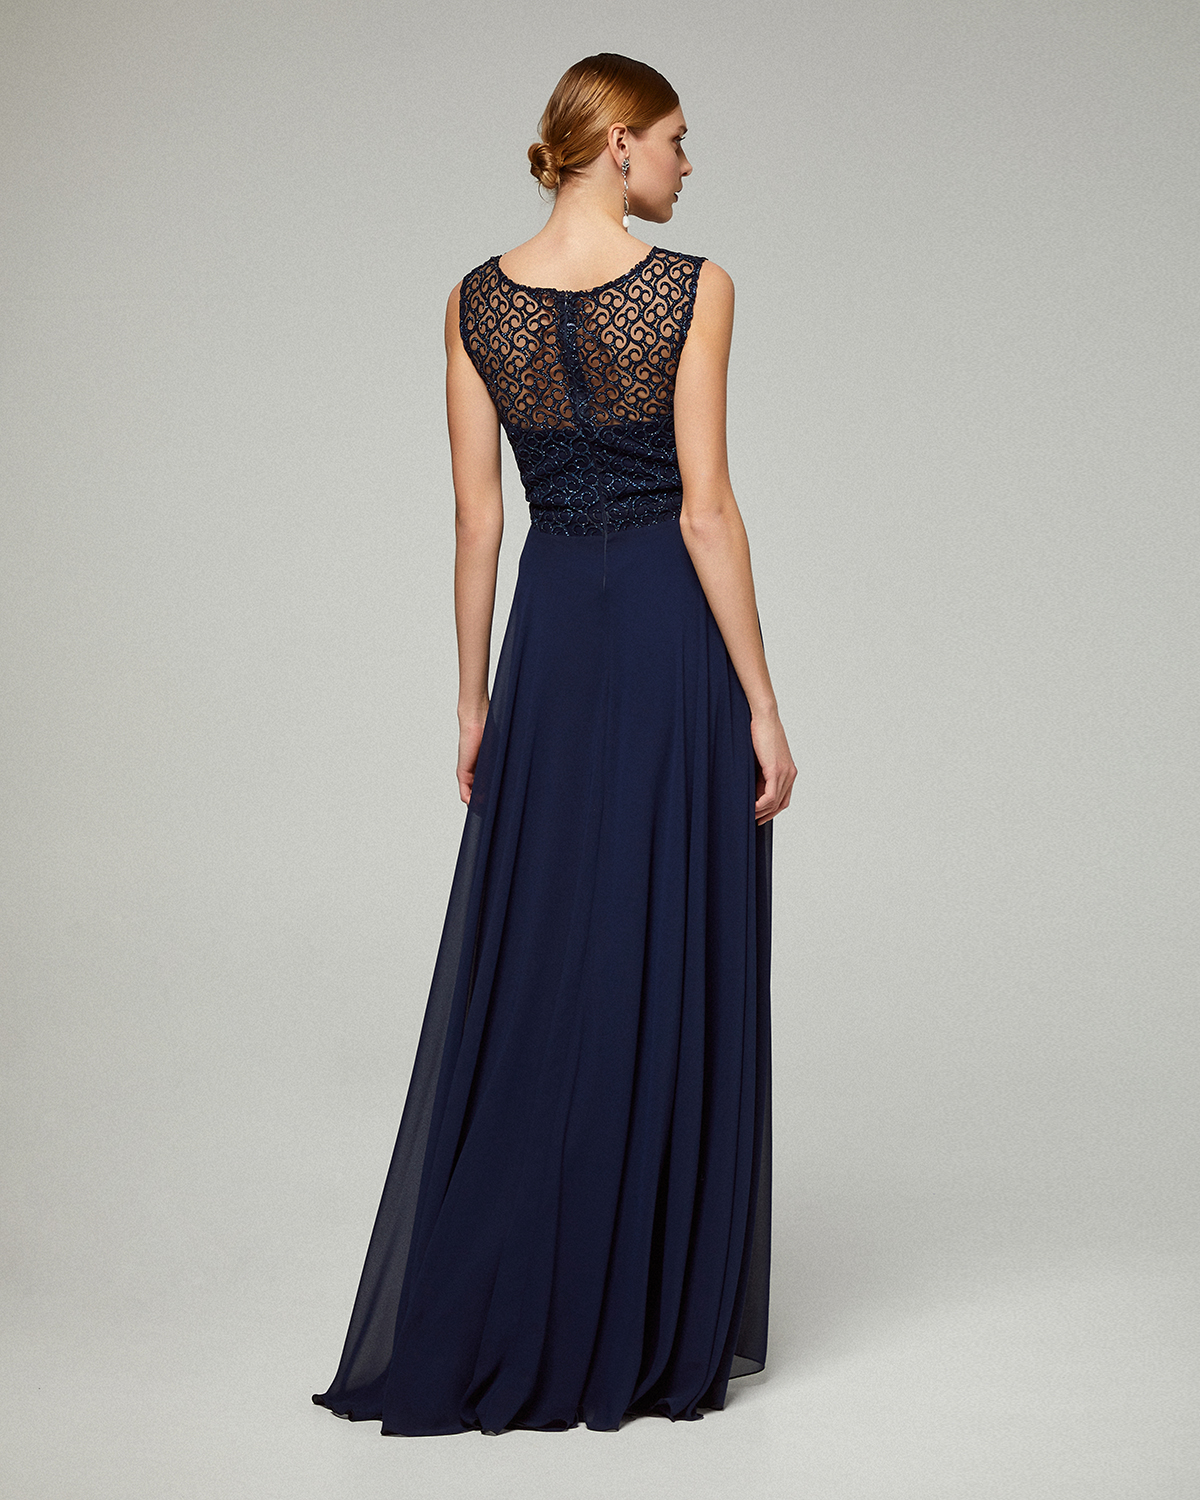 Long evening chiffon dress with beaded lace on the top for the mother of the bride